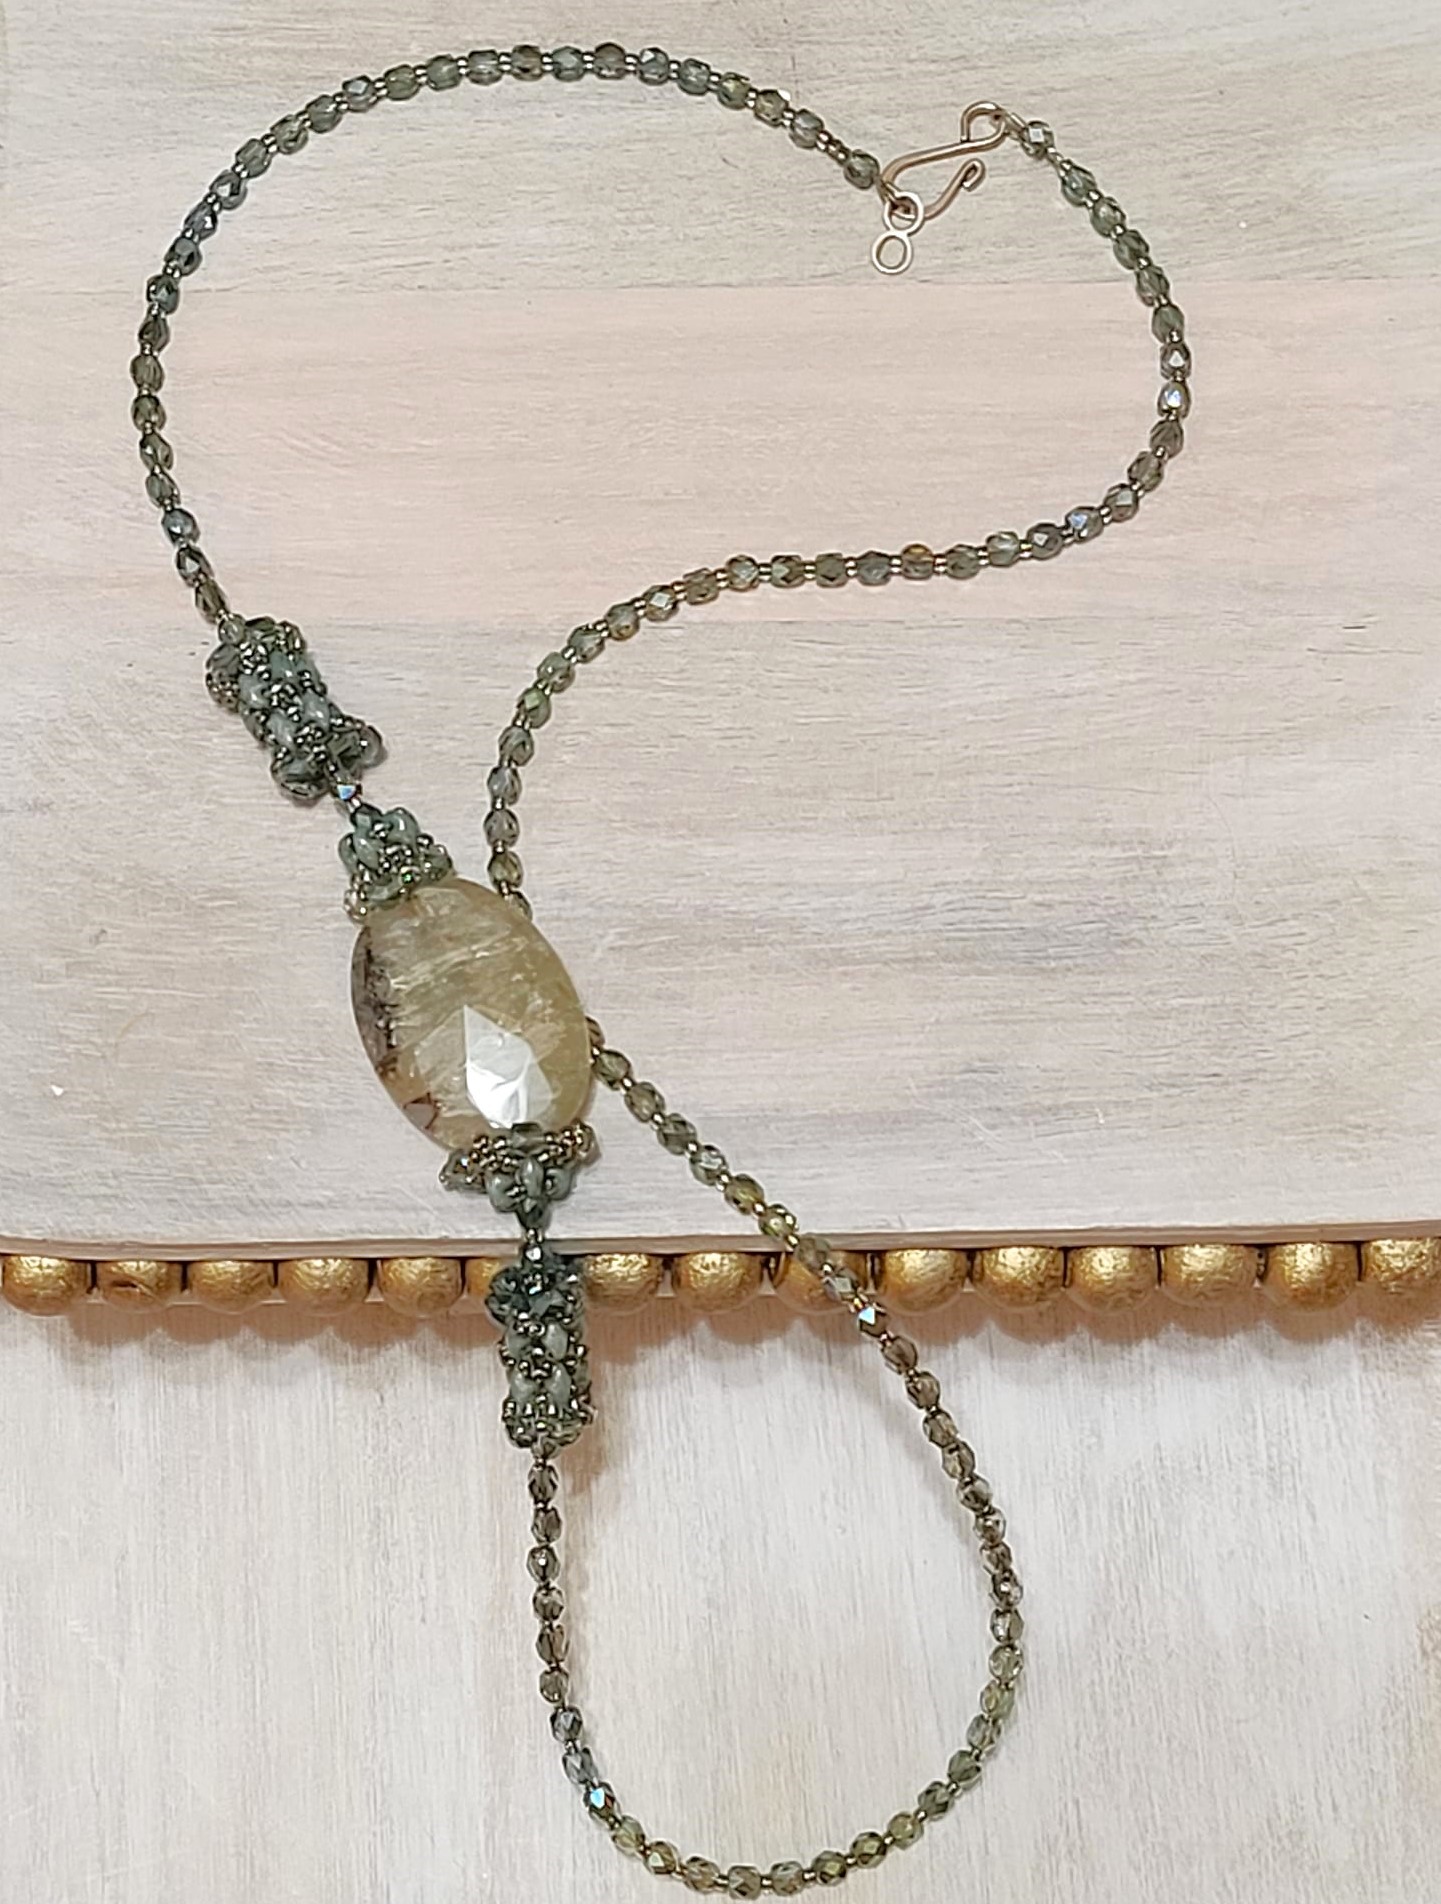 Gemstone and crystal necklace, green agate, green aurora crystal